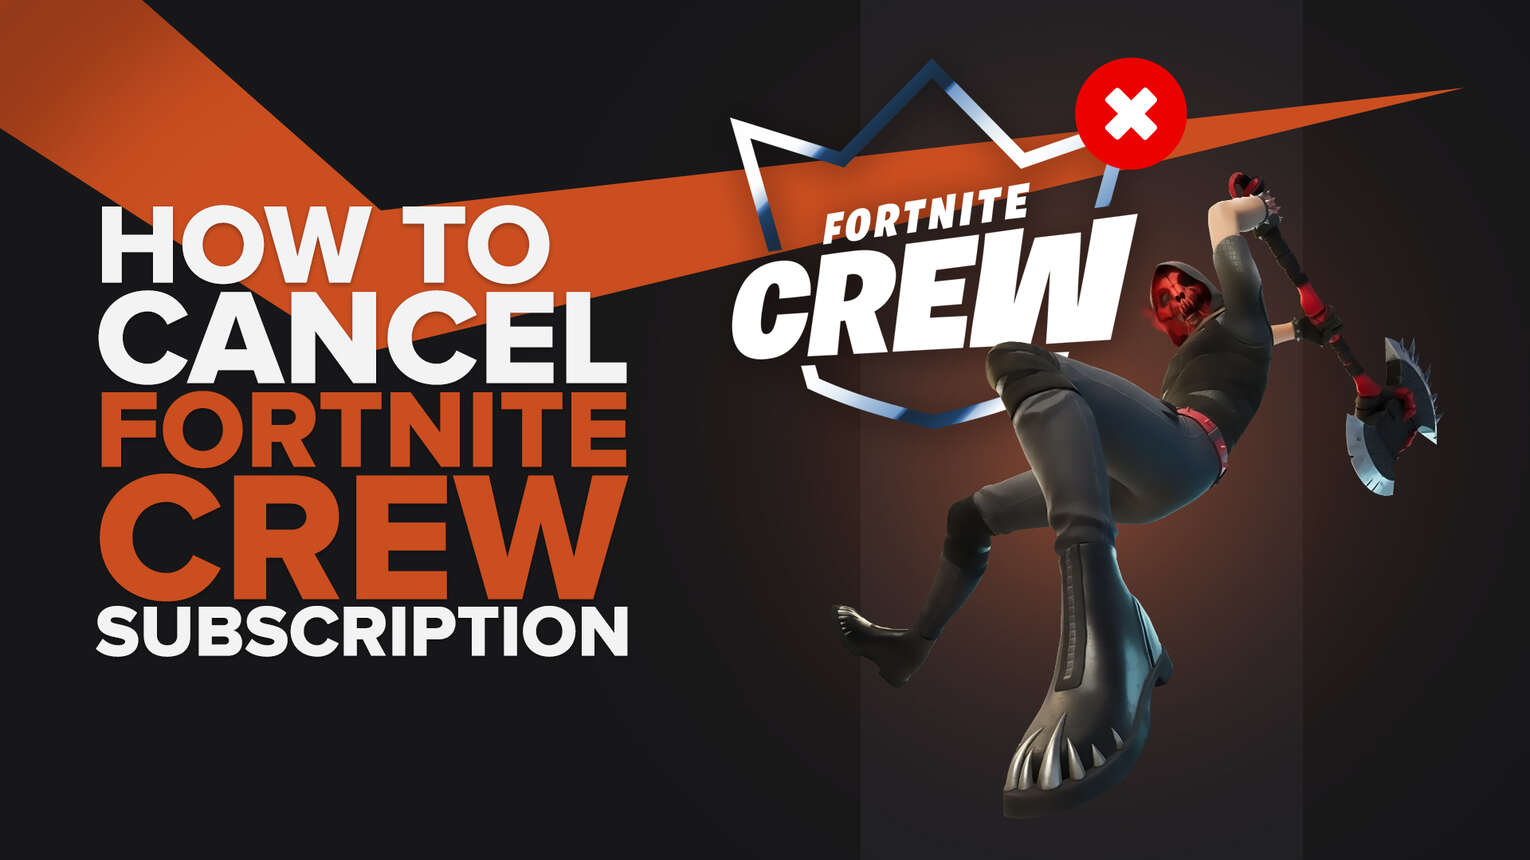 How To Cancel Fortnite Crew Subscription [All Platforms]